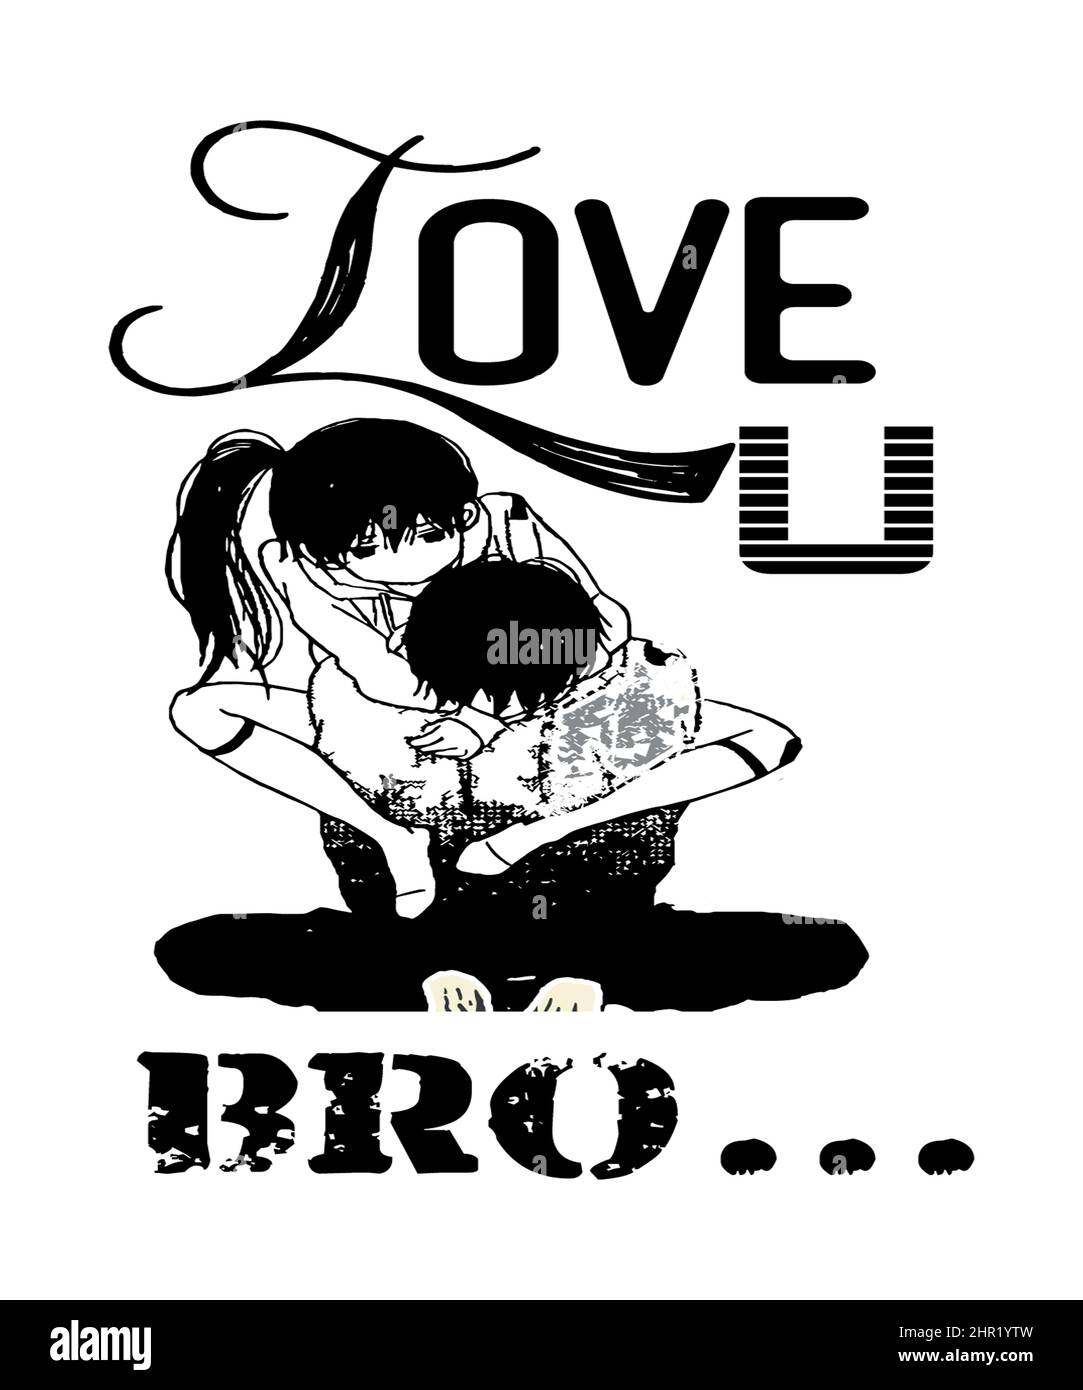 Love you bro anime sketch of siblings of a brother and sister in black text with white background. Stock Photo